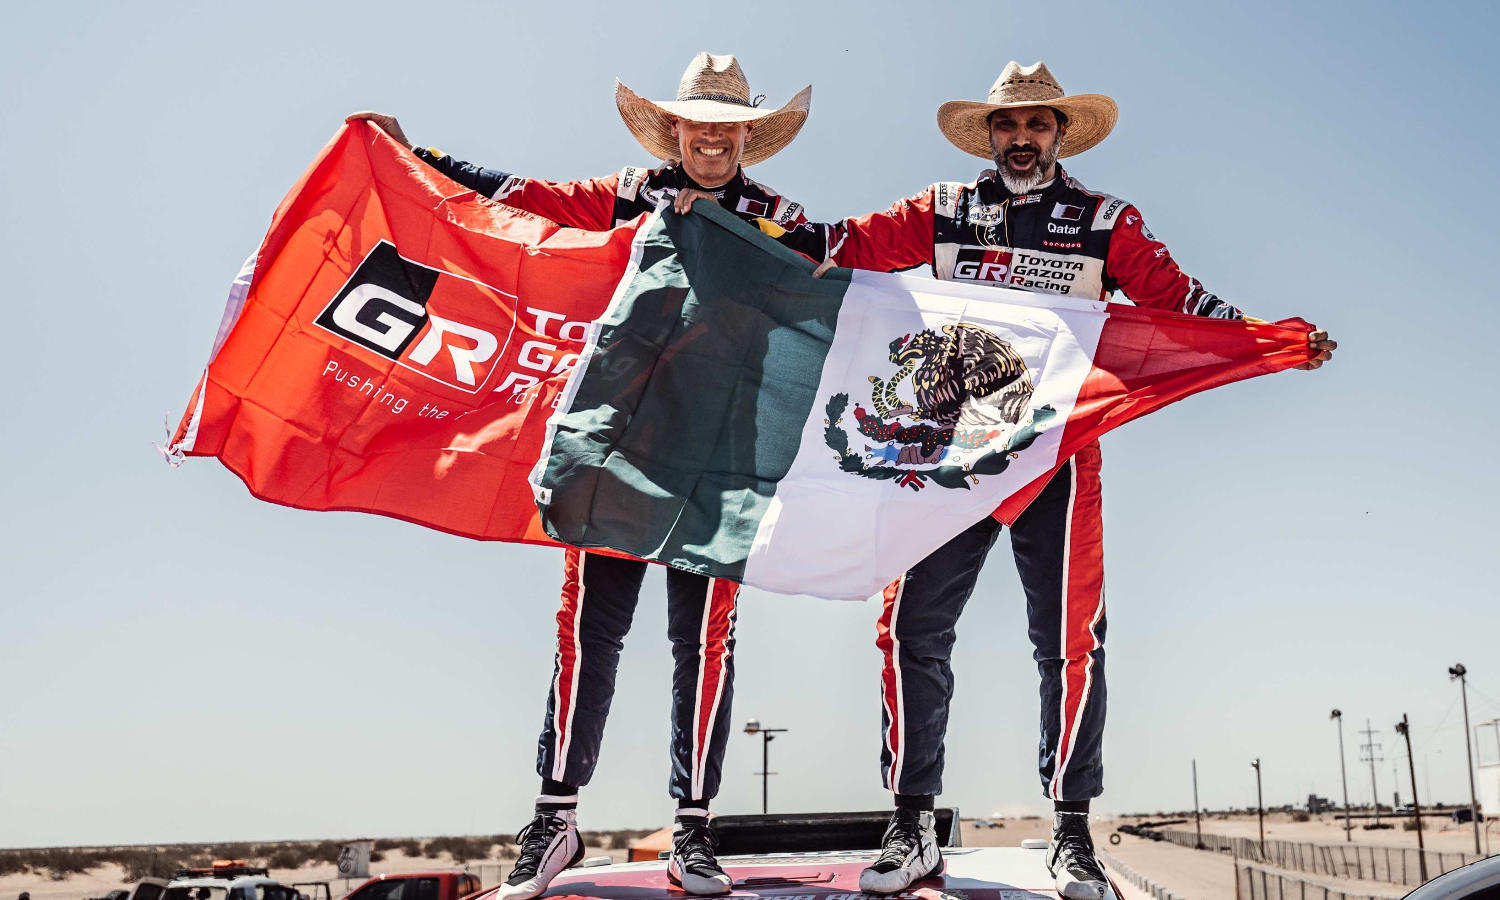 Sonora Rally 2023: Al-Attiyah and Al-Rahji claim emphatic 1-2 finish for Toyota at gruelling Sonora Rally in Mexico